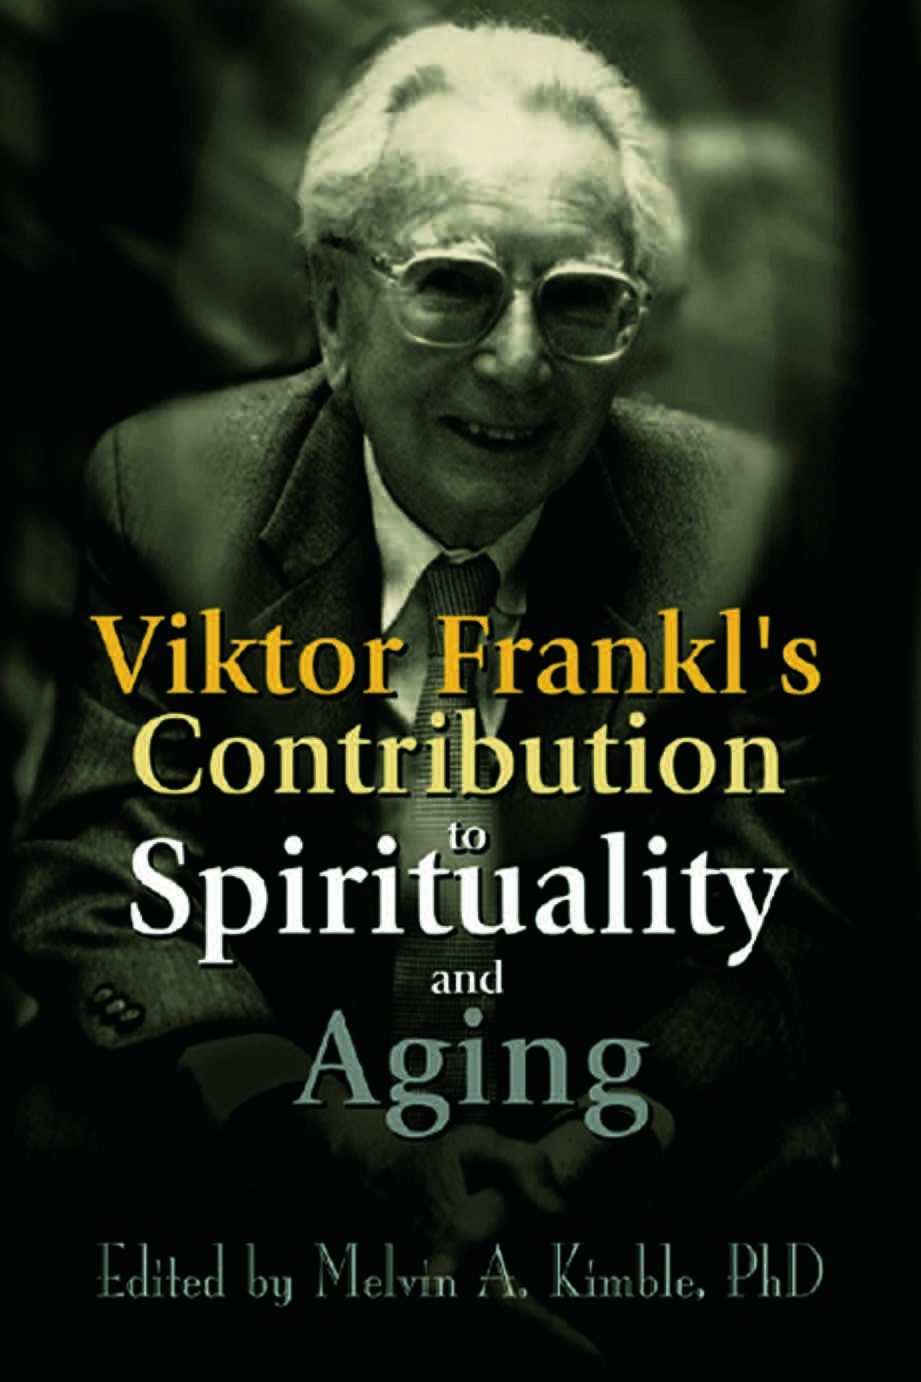 Viktor Frankl’s Contribution to Spirituality and Aging